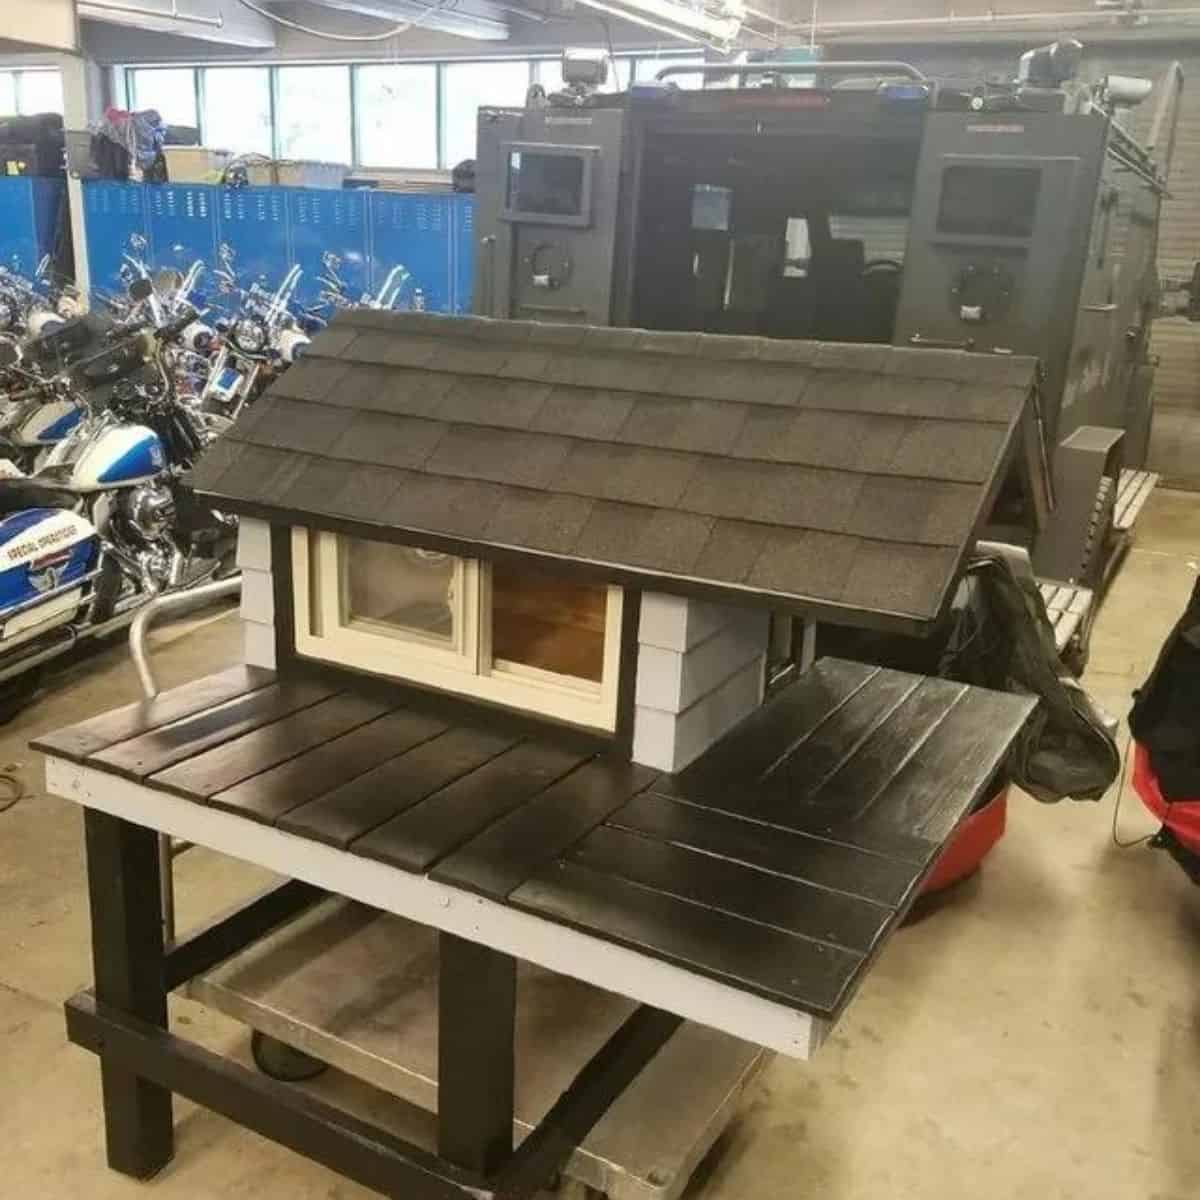 house for cat